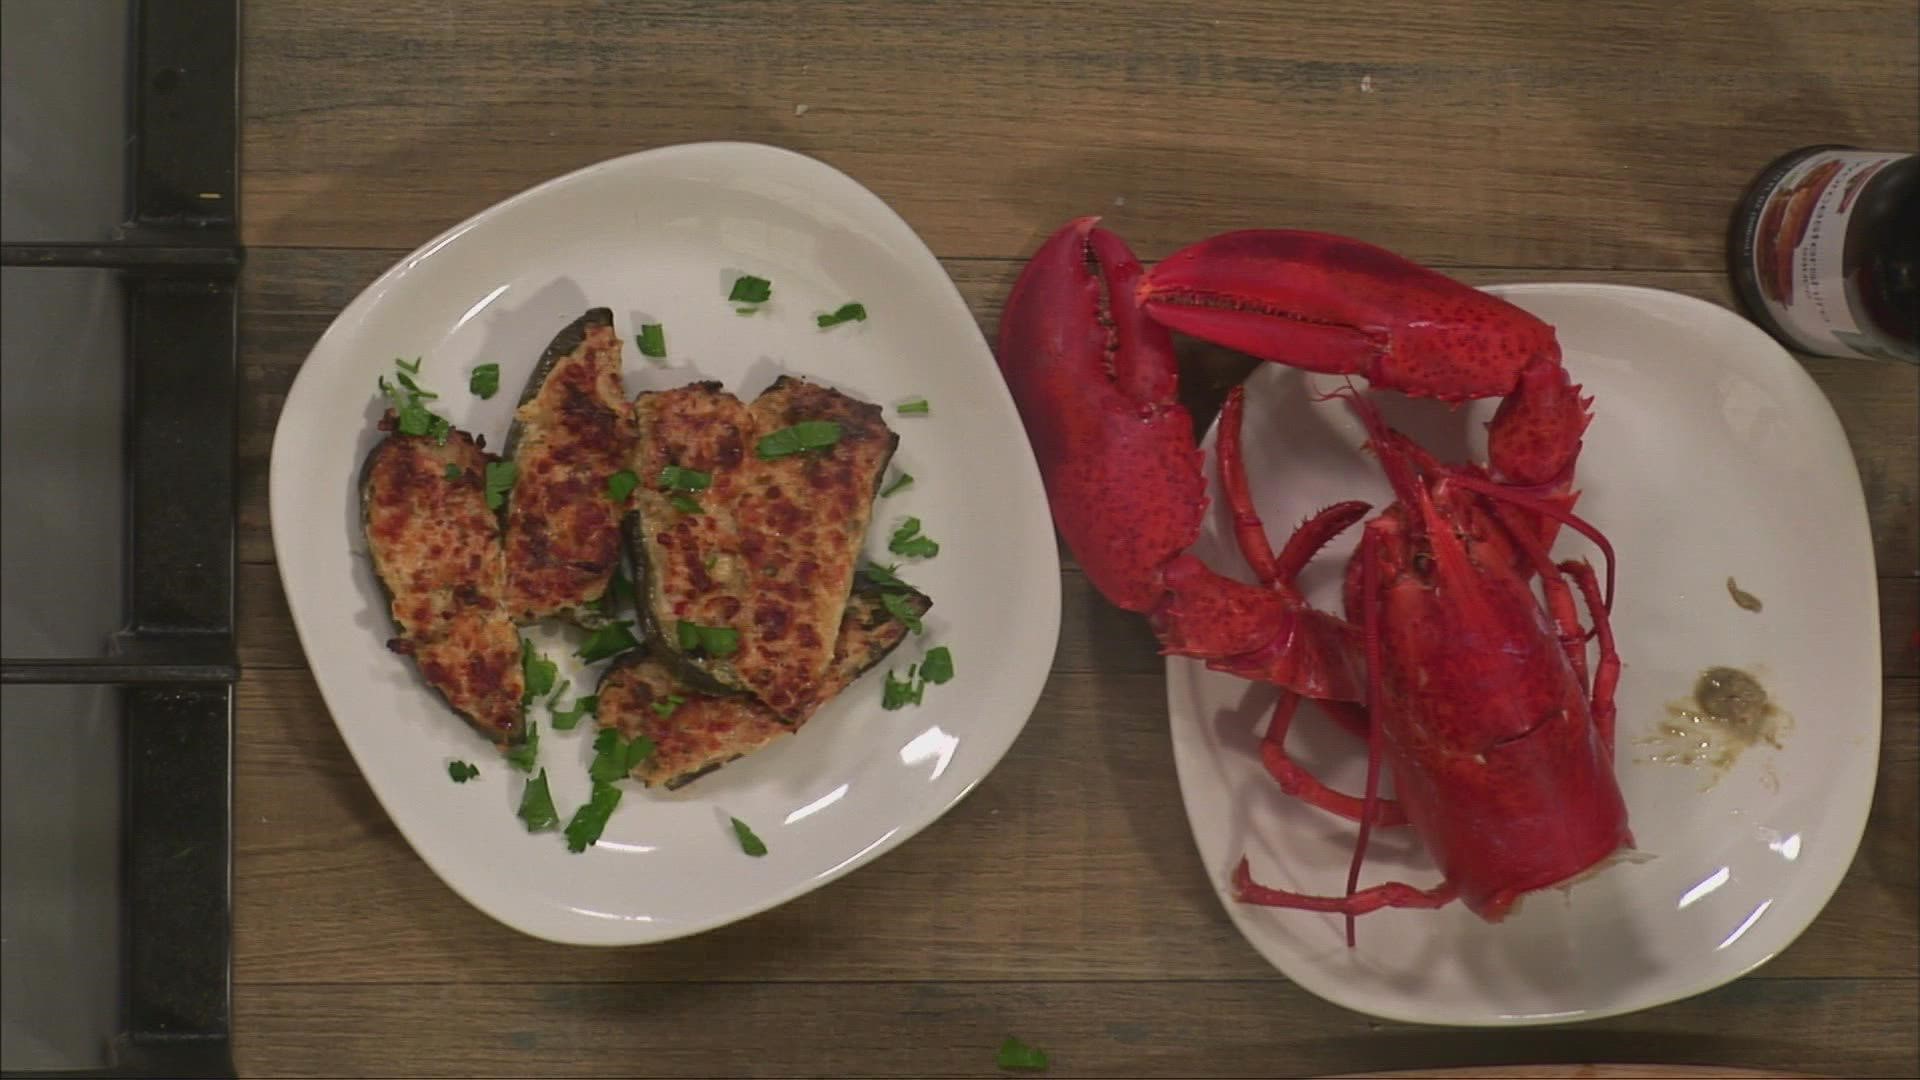 Anna Miller from The Maker's Galley shares her recipe for lobster jalapeño poppers